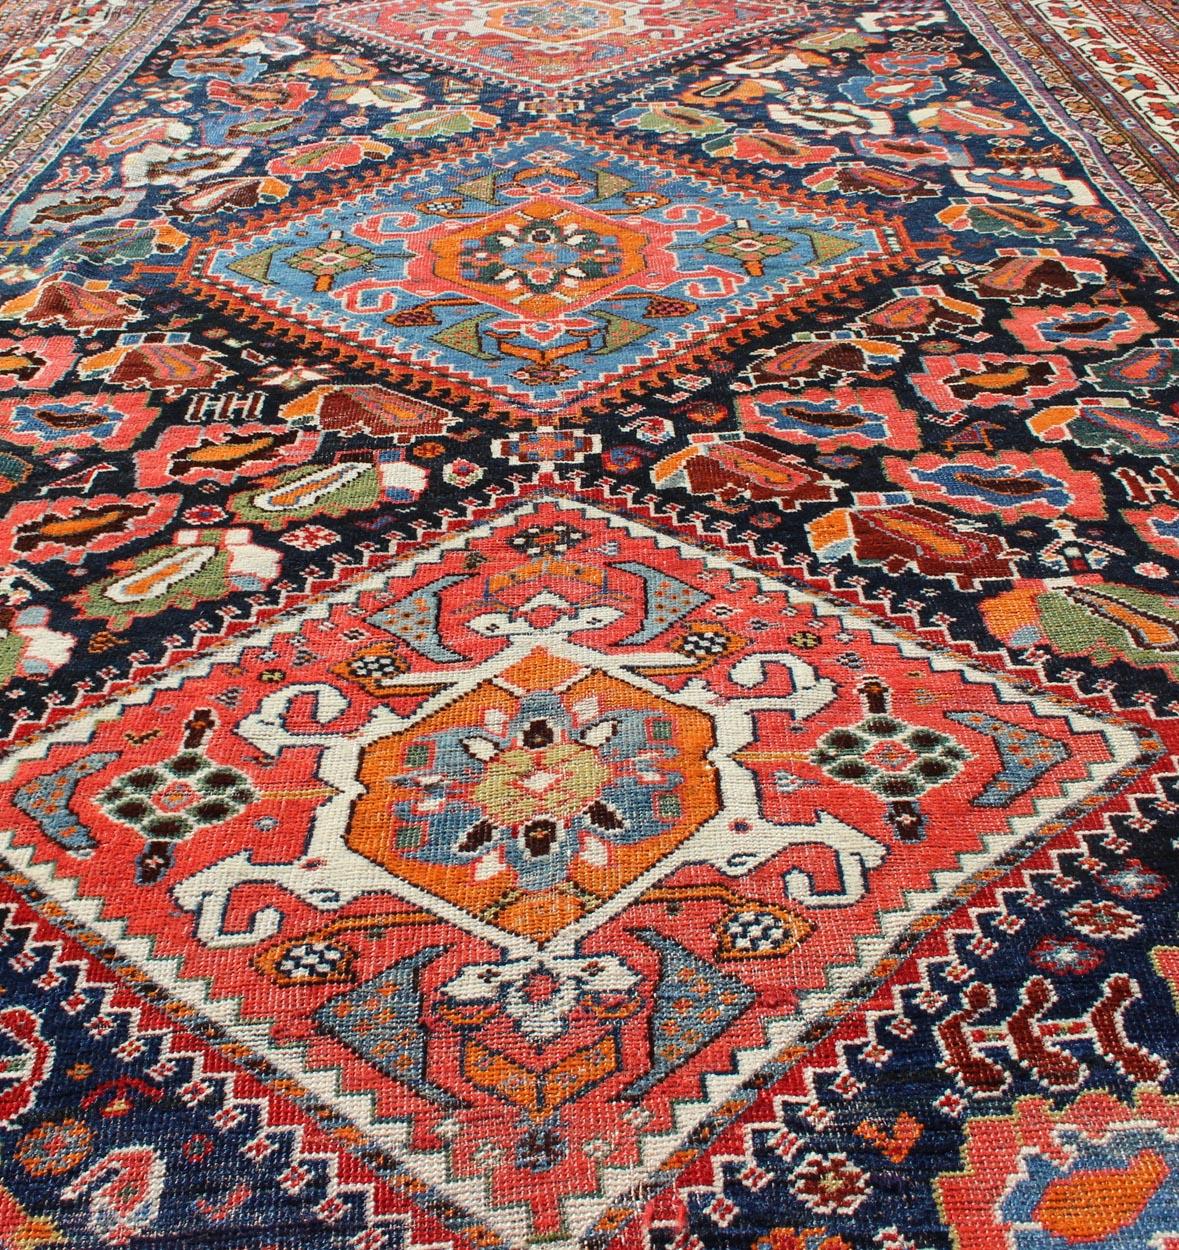 Colorful Tri-Medallion Antique Persian Qashqai Rug with Detailed Tribal Design For Sale 2